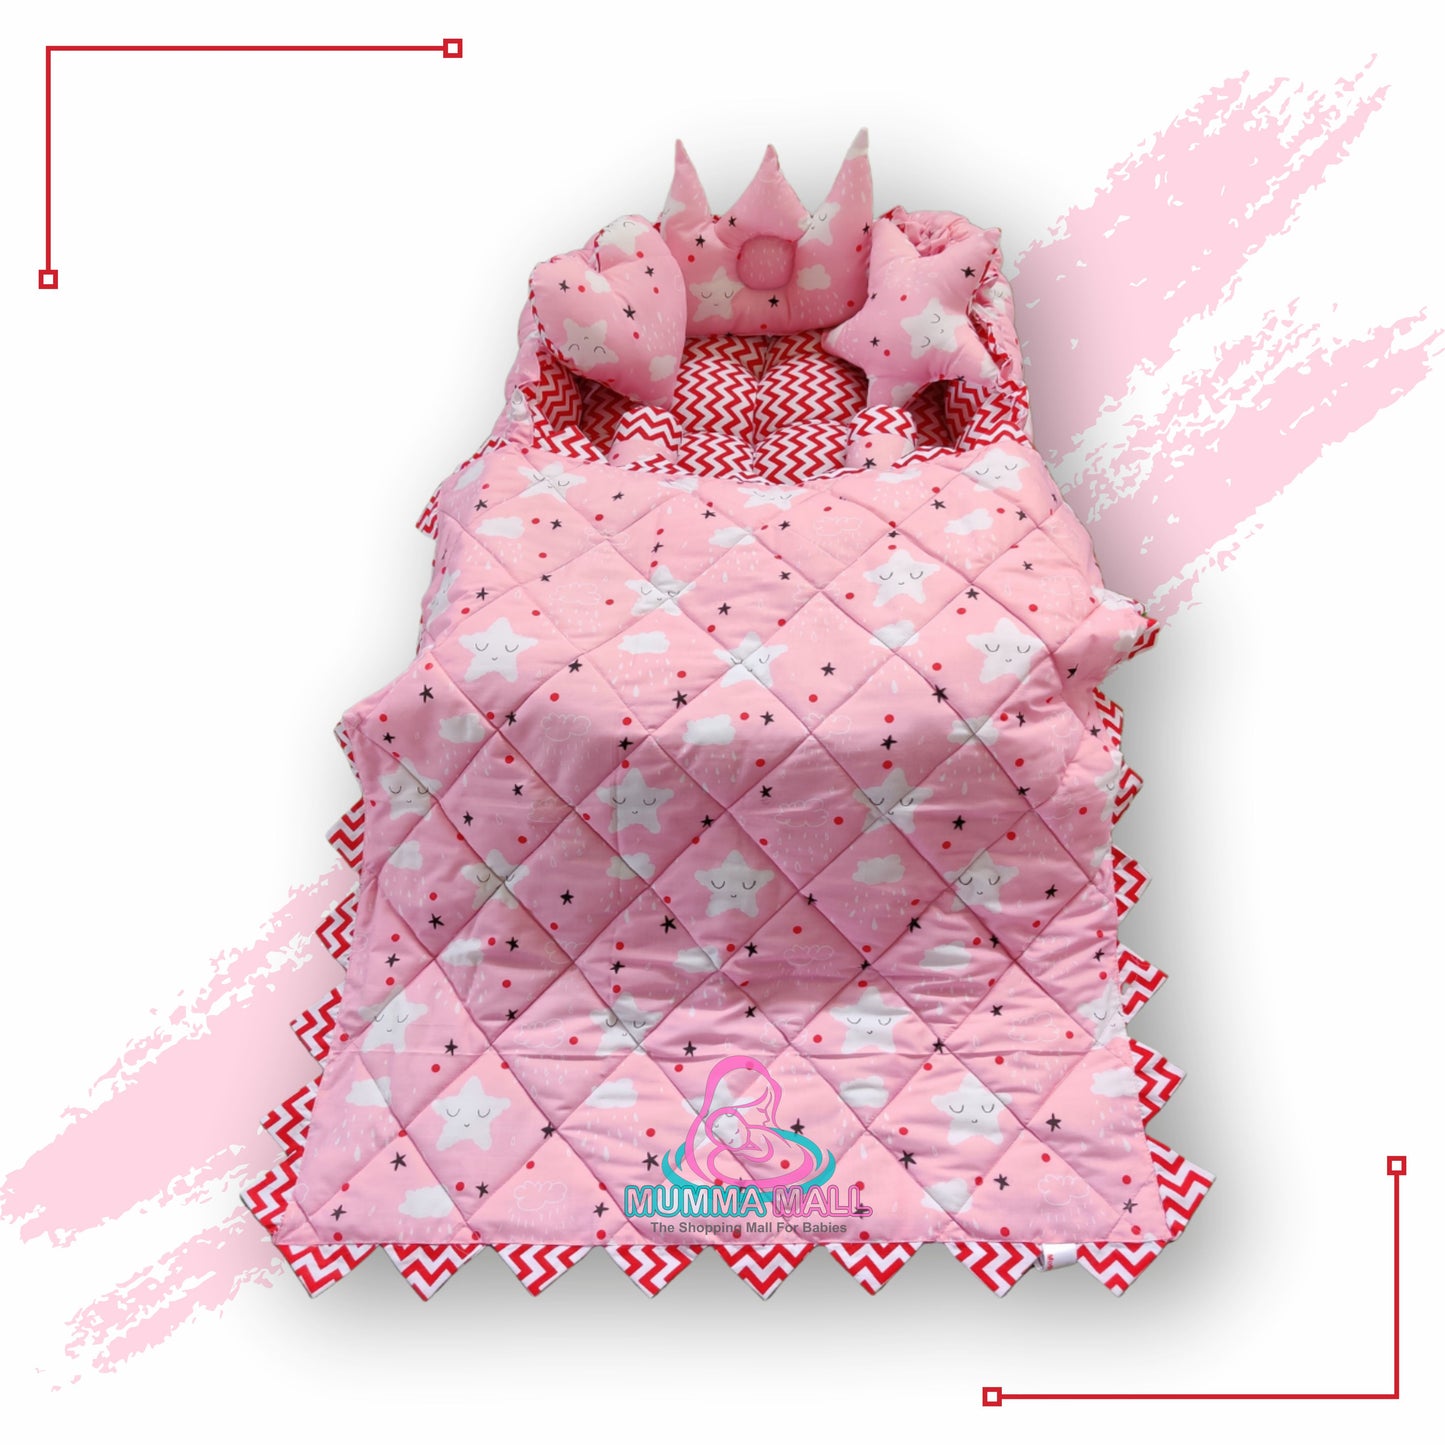 Rectangle baby tub bed with blanket and set of 5 pillows as neck support, side support and toy (Pink and Red)